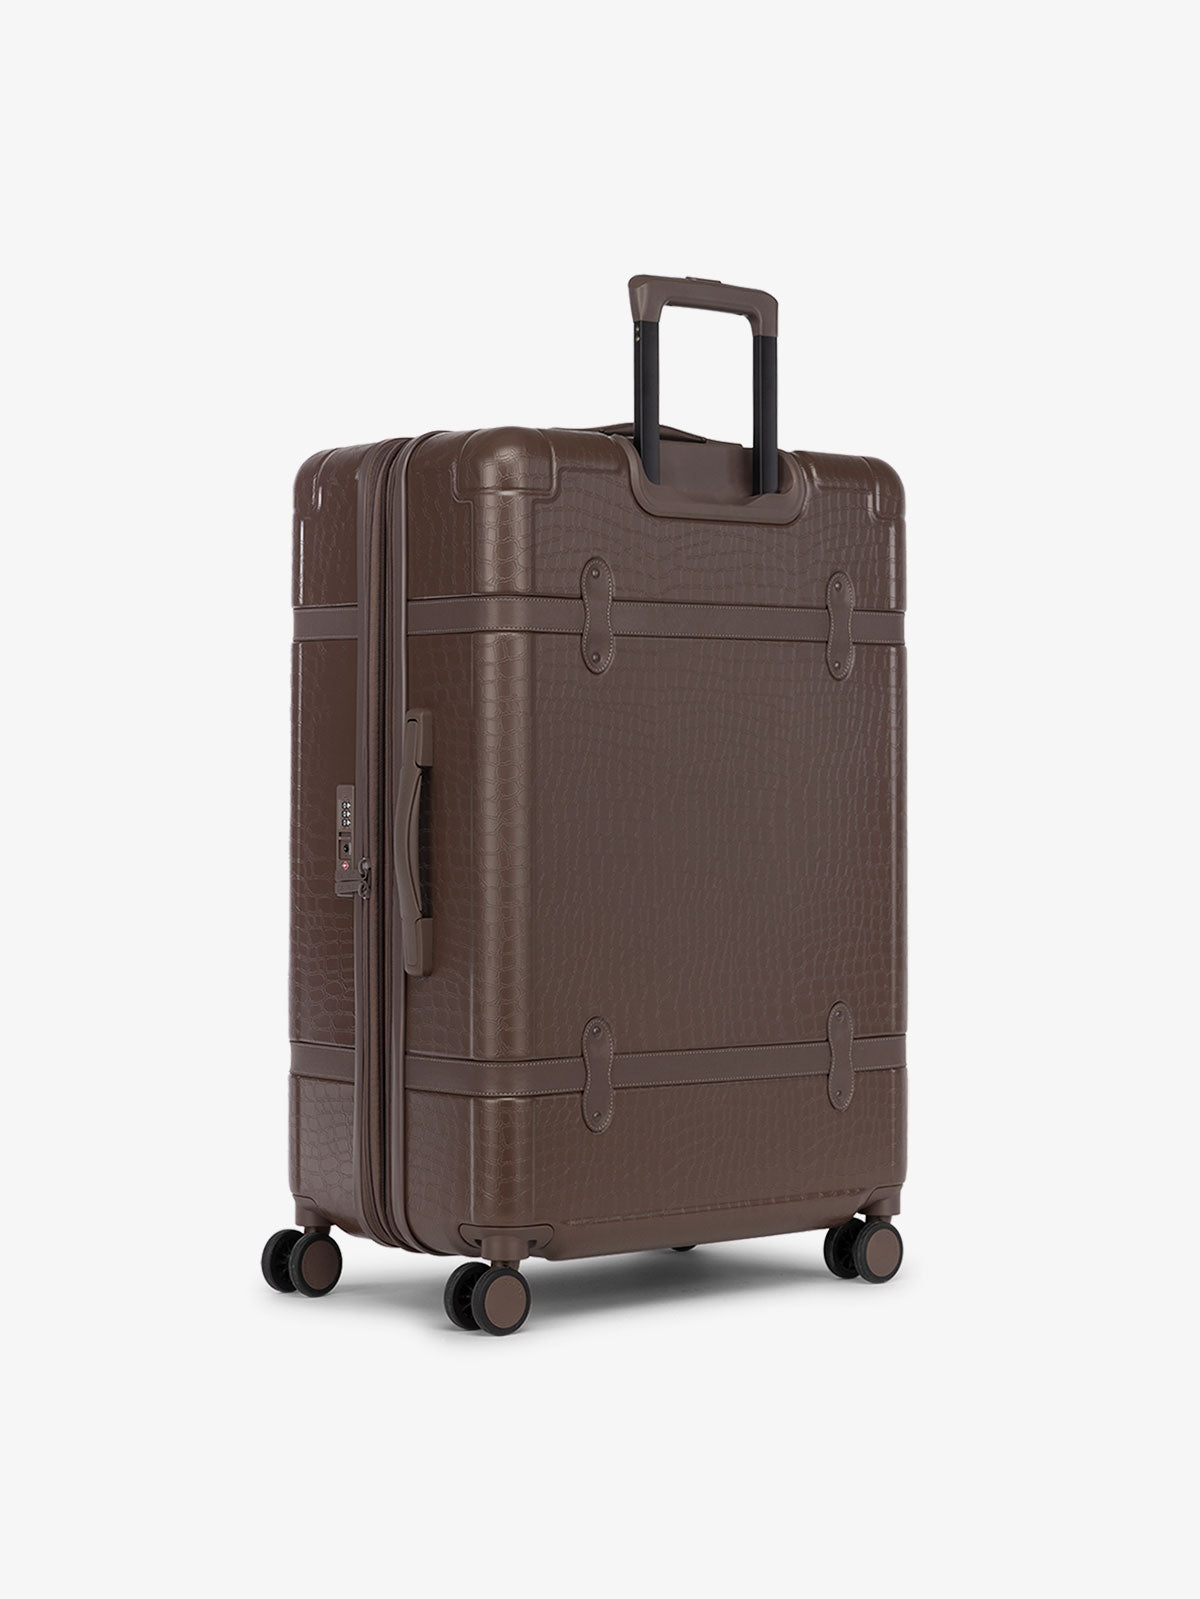 CALPAK TRNK 29 inch luggage with TSA approved locks 360 spinner wheels and top and side handles in espresso